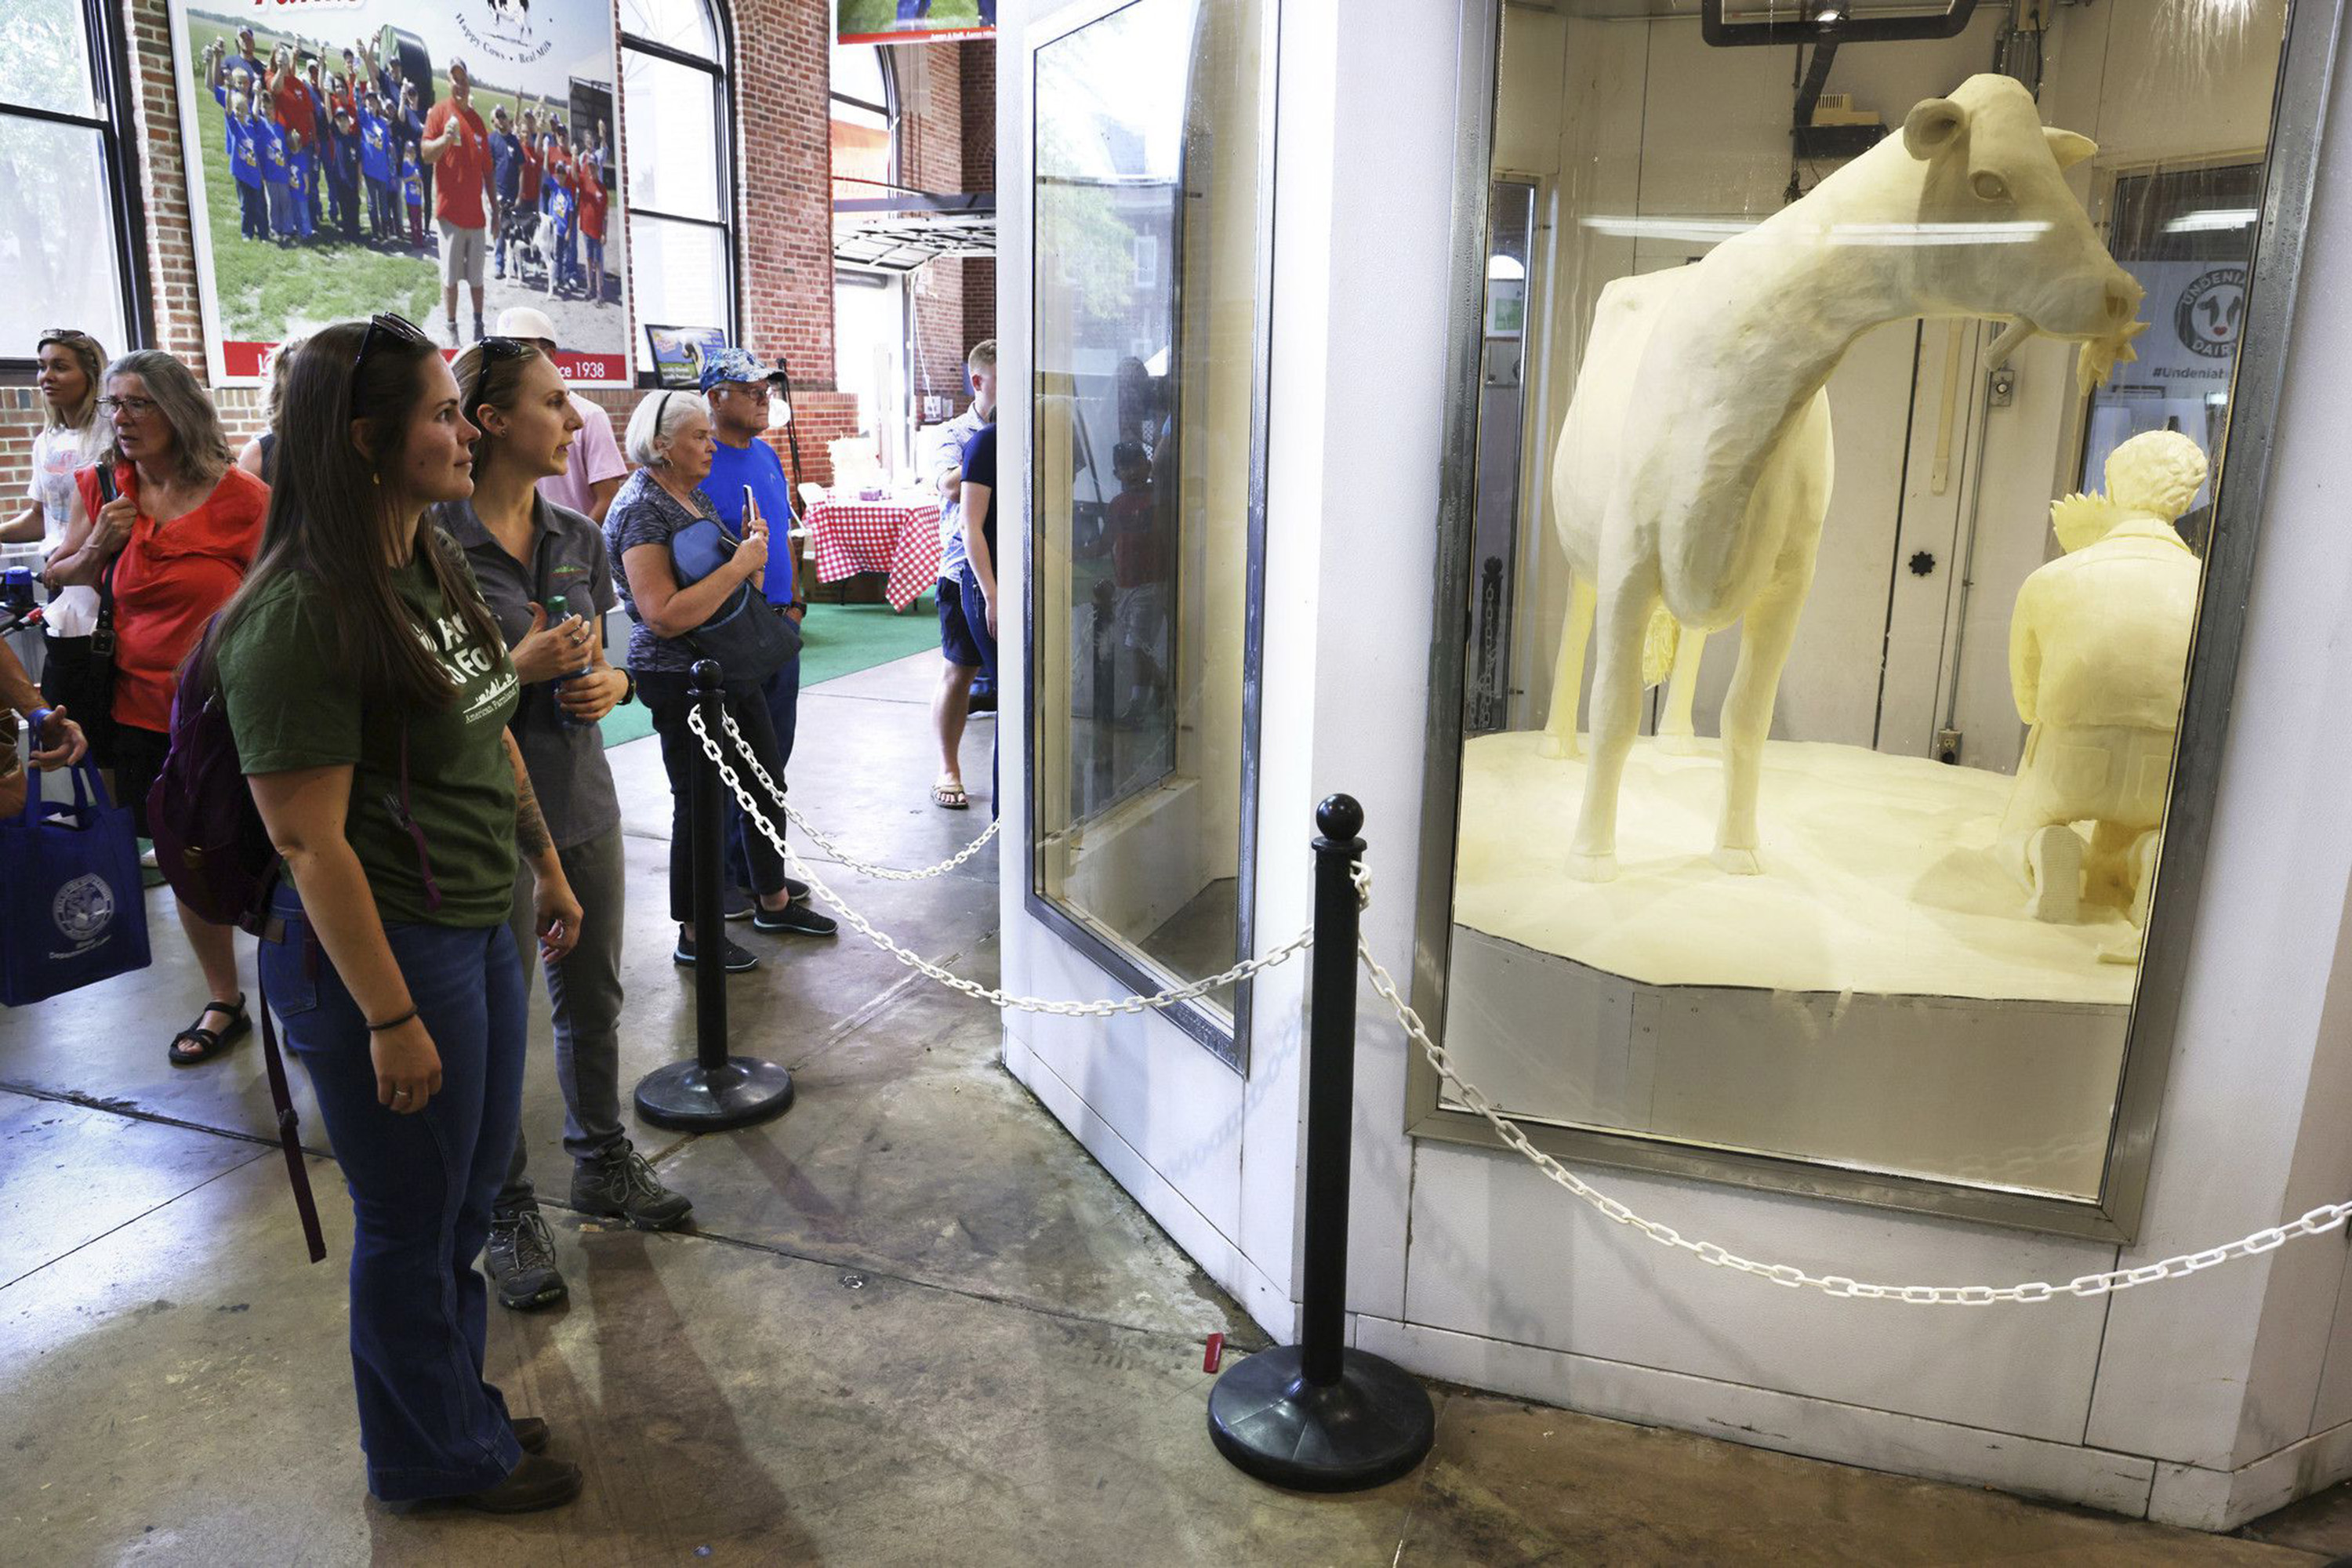 State fair butter cows aren't made entirely out of butter — and
people are udderly shocked